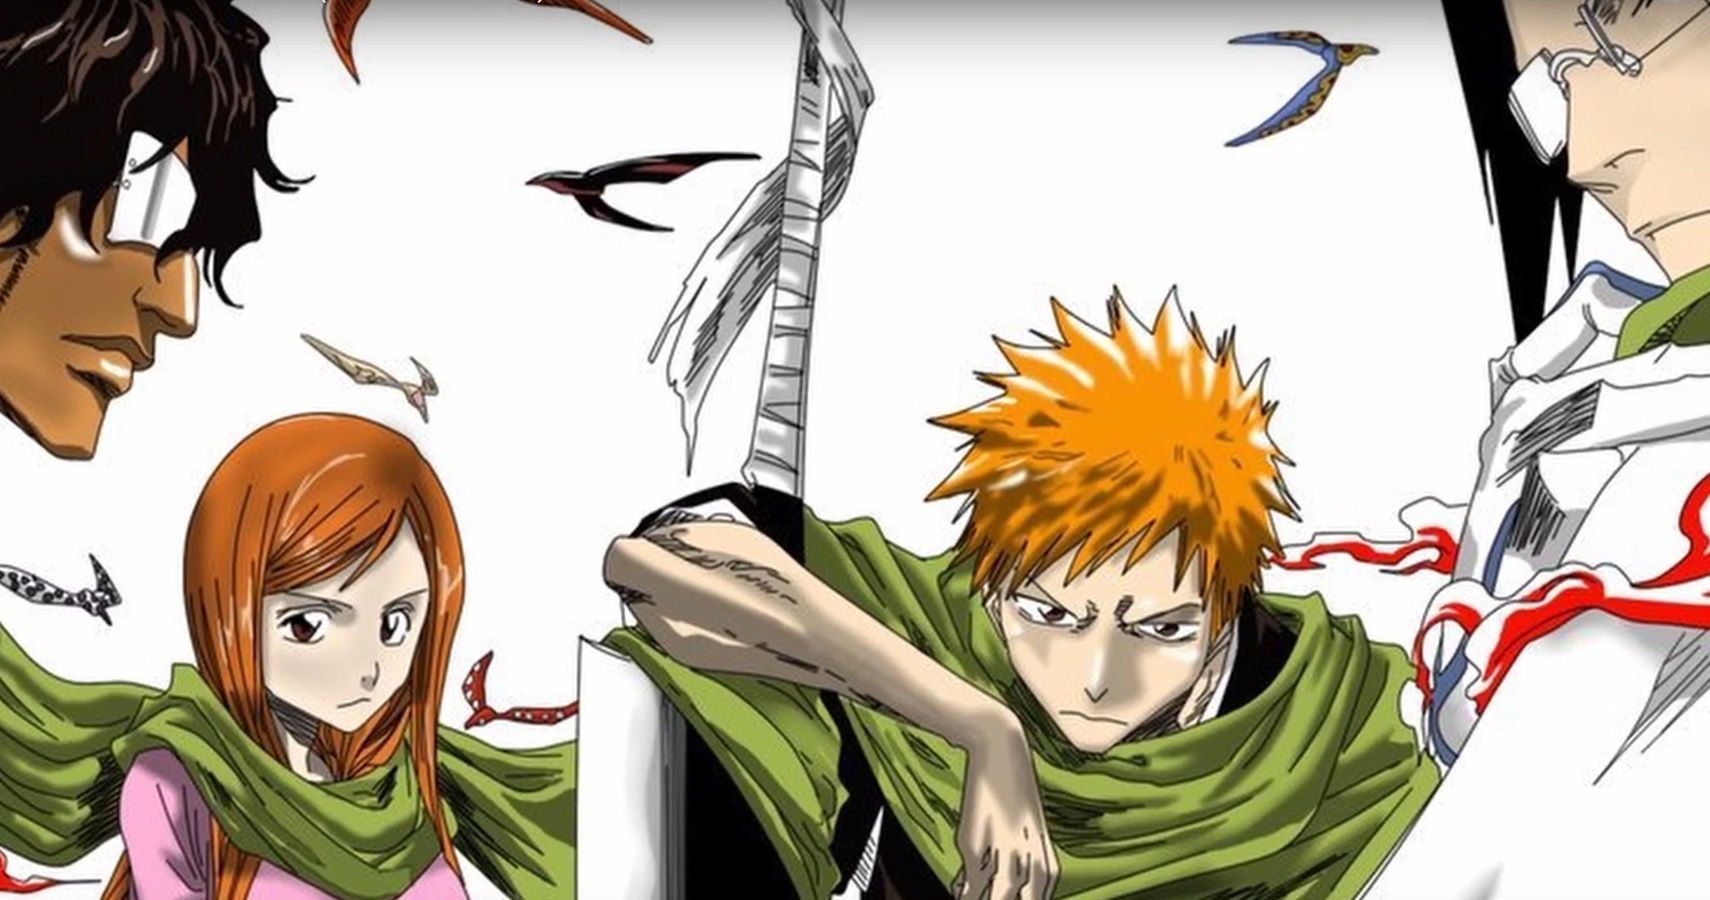 Bleach: 5 Reasons Why The Ending was Disappointing (& 5 Things It Got Right)